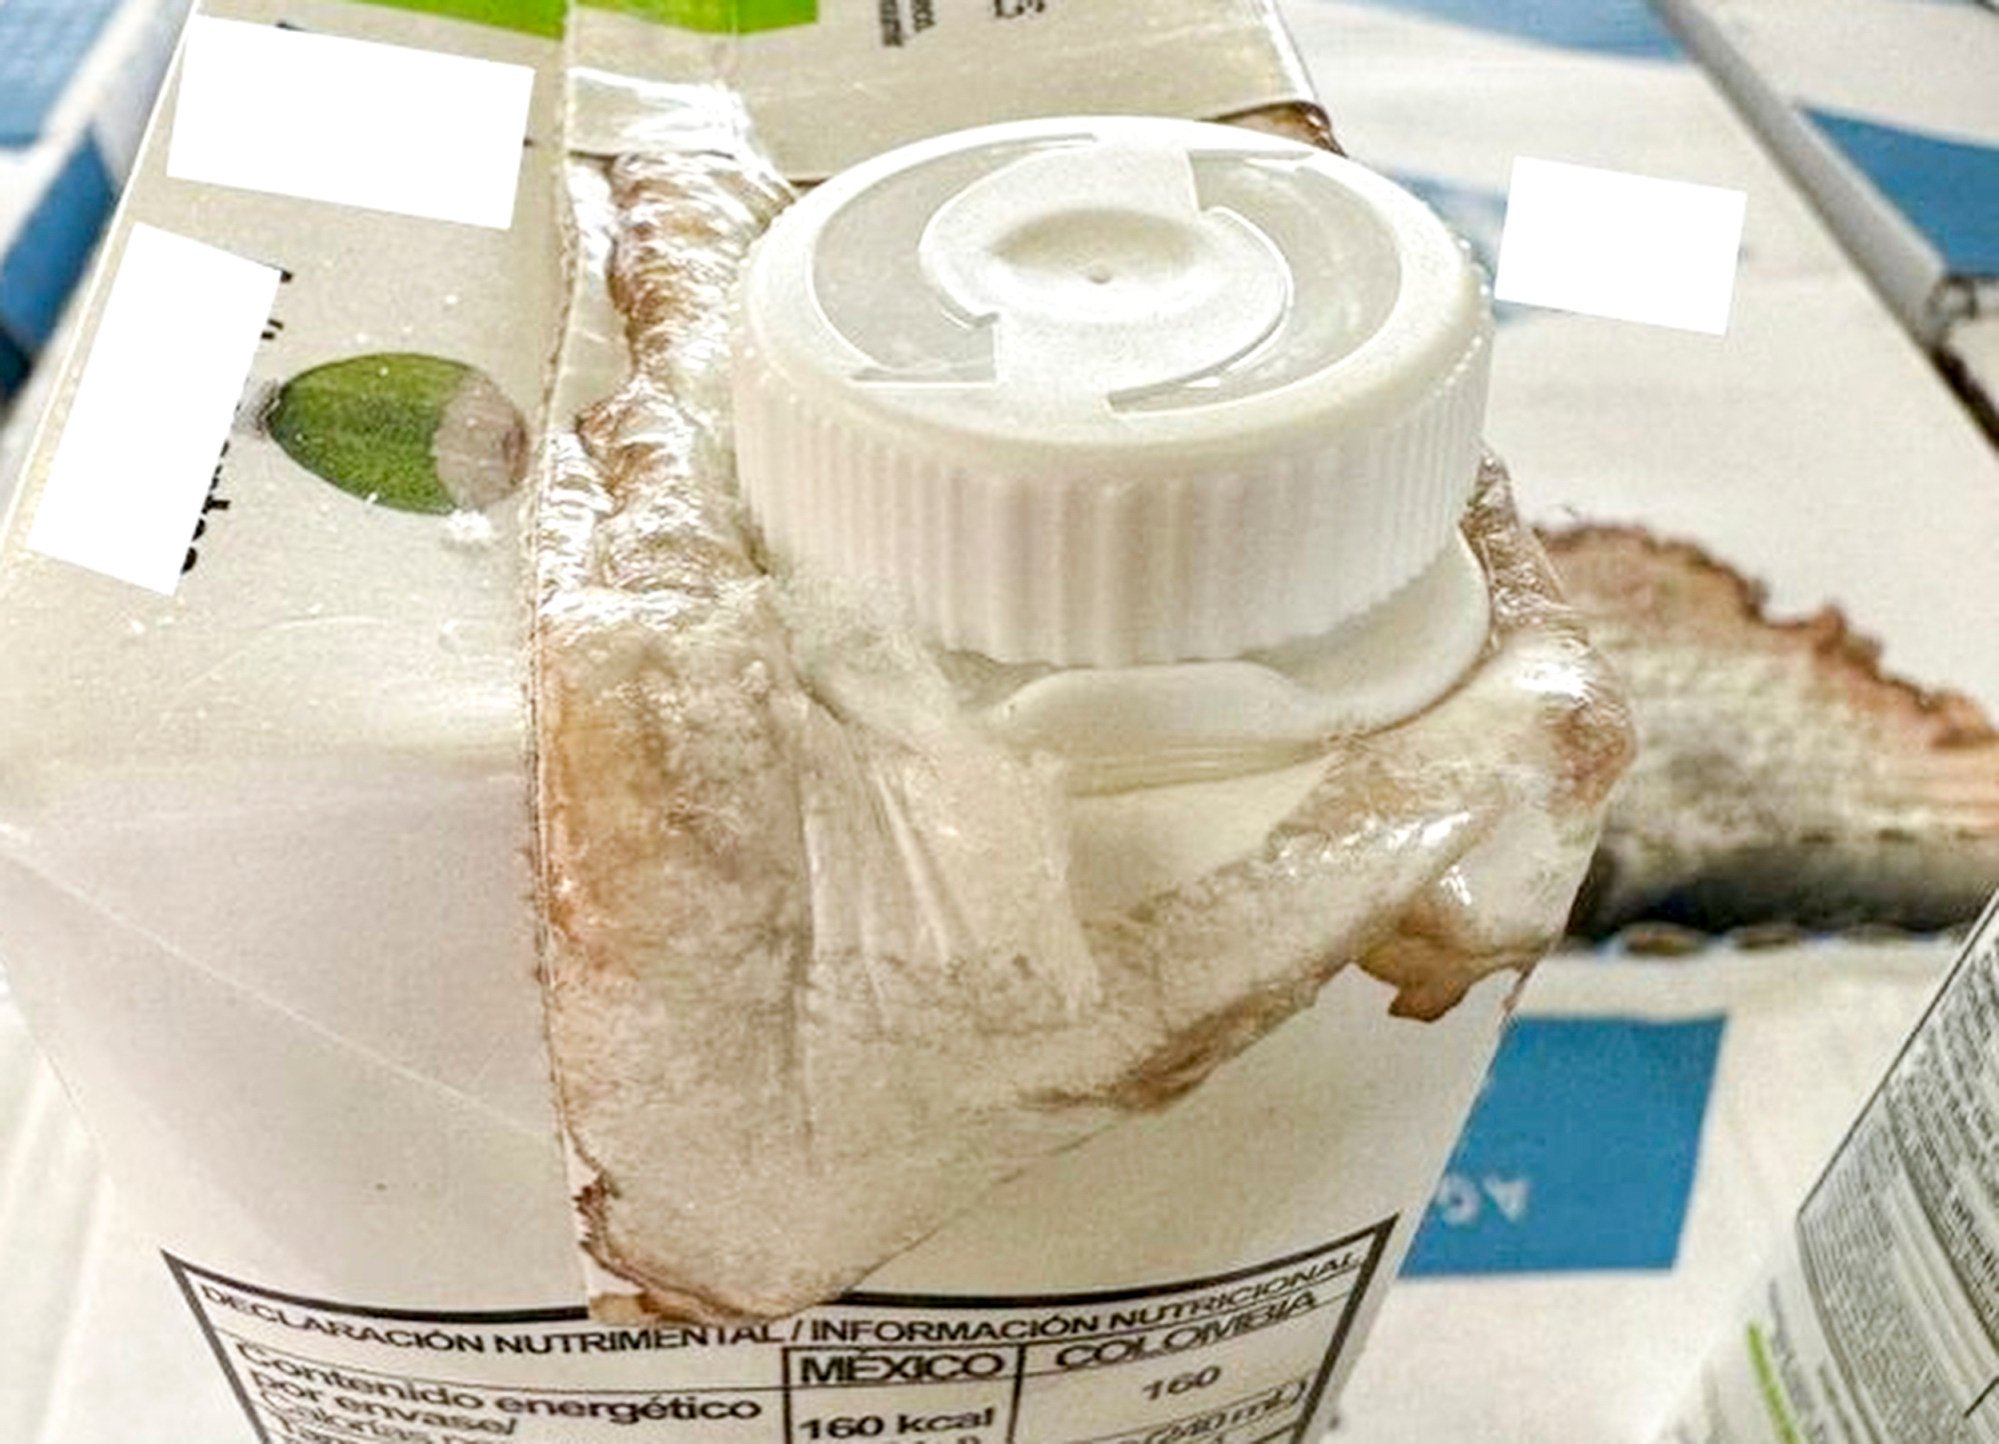 The drugs were hidden in one-litre cartons. Photo: Handout